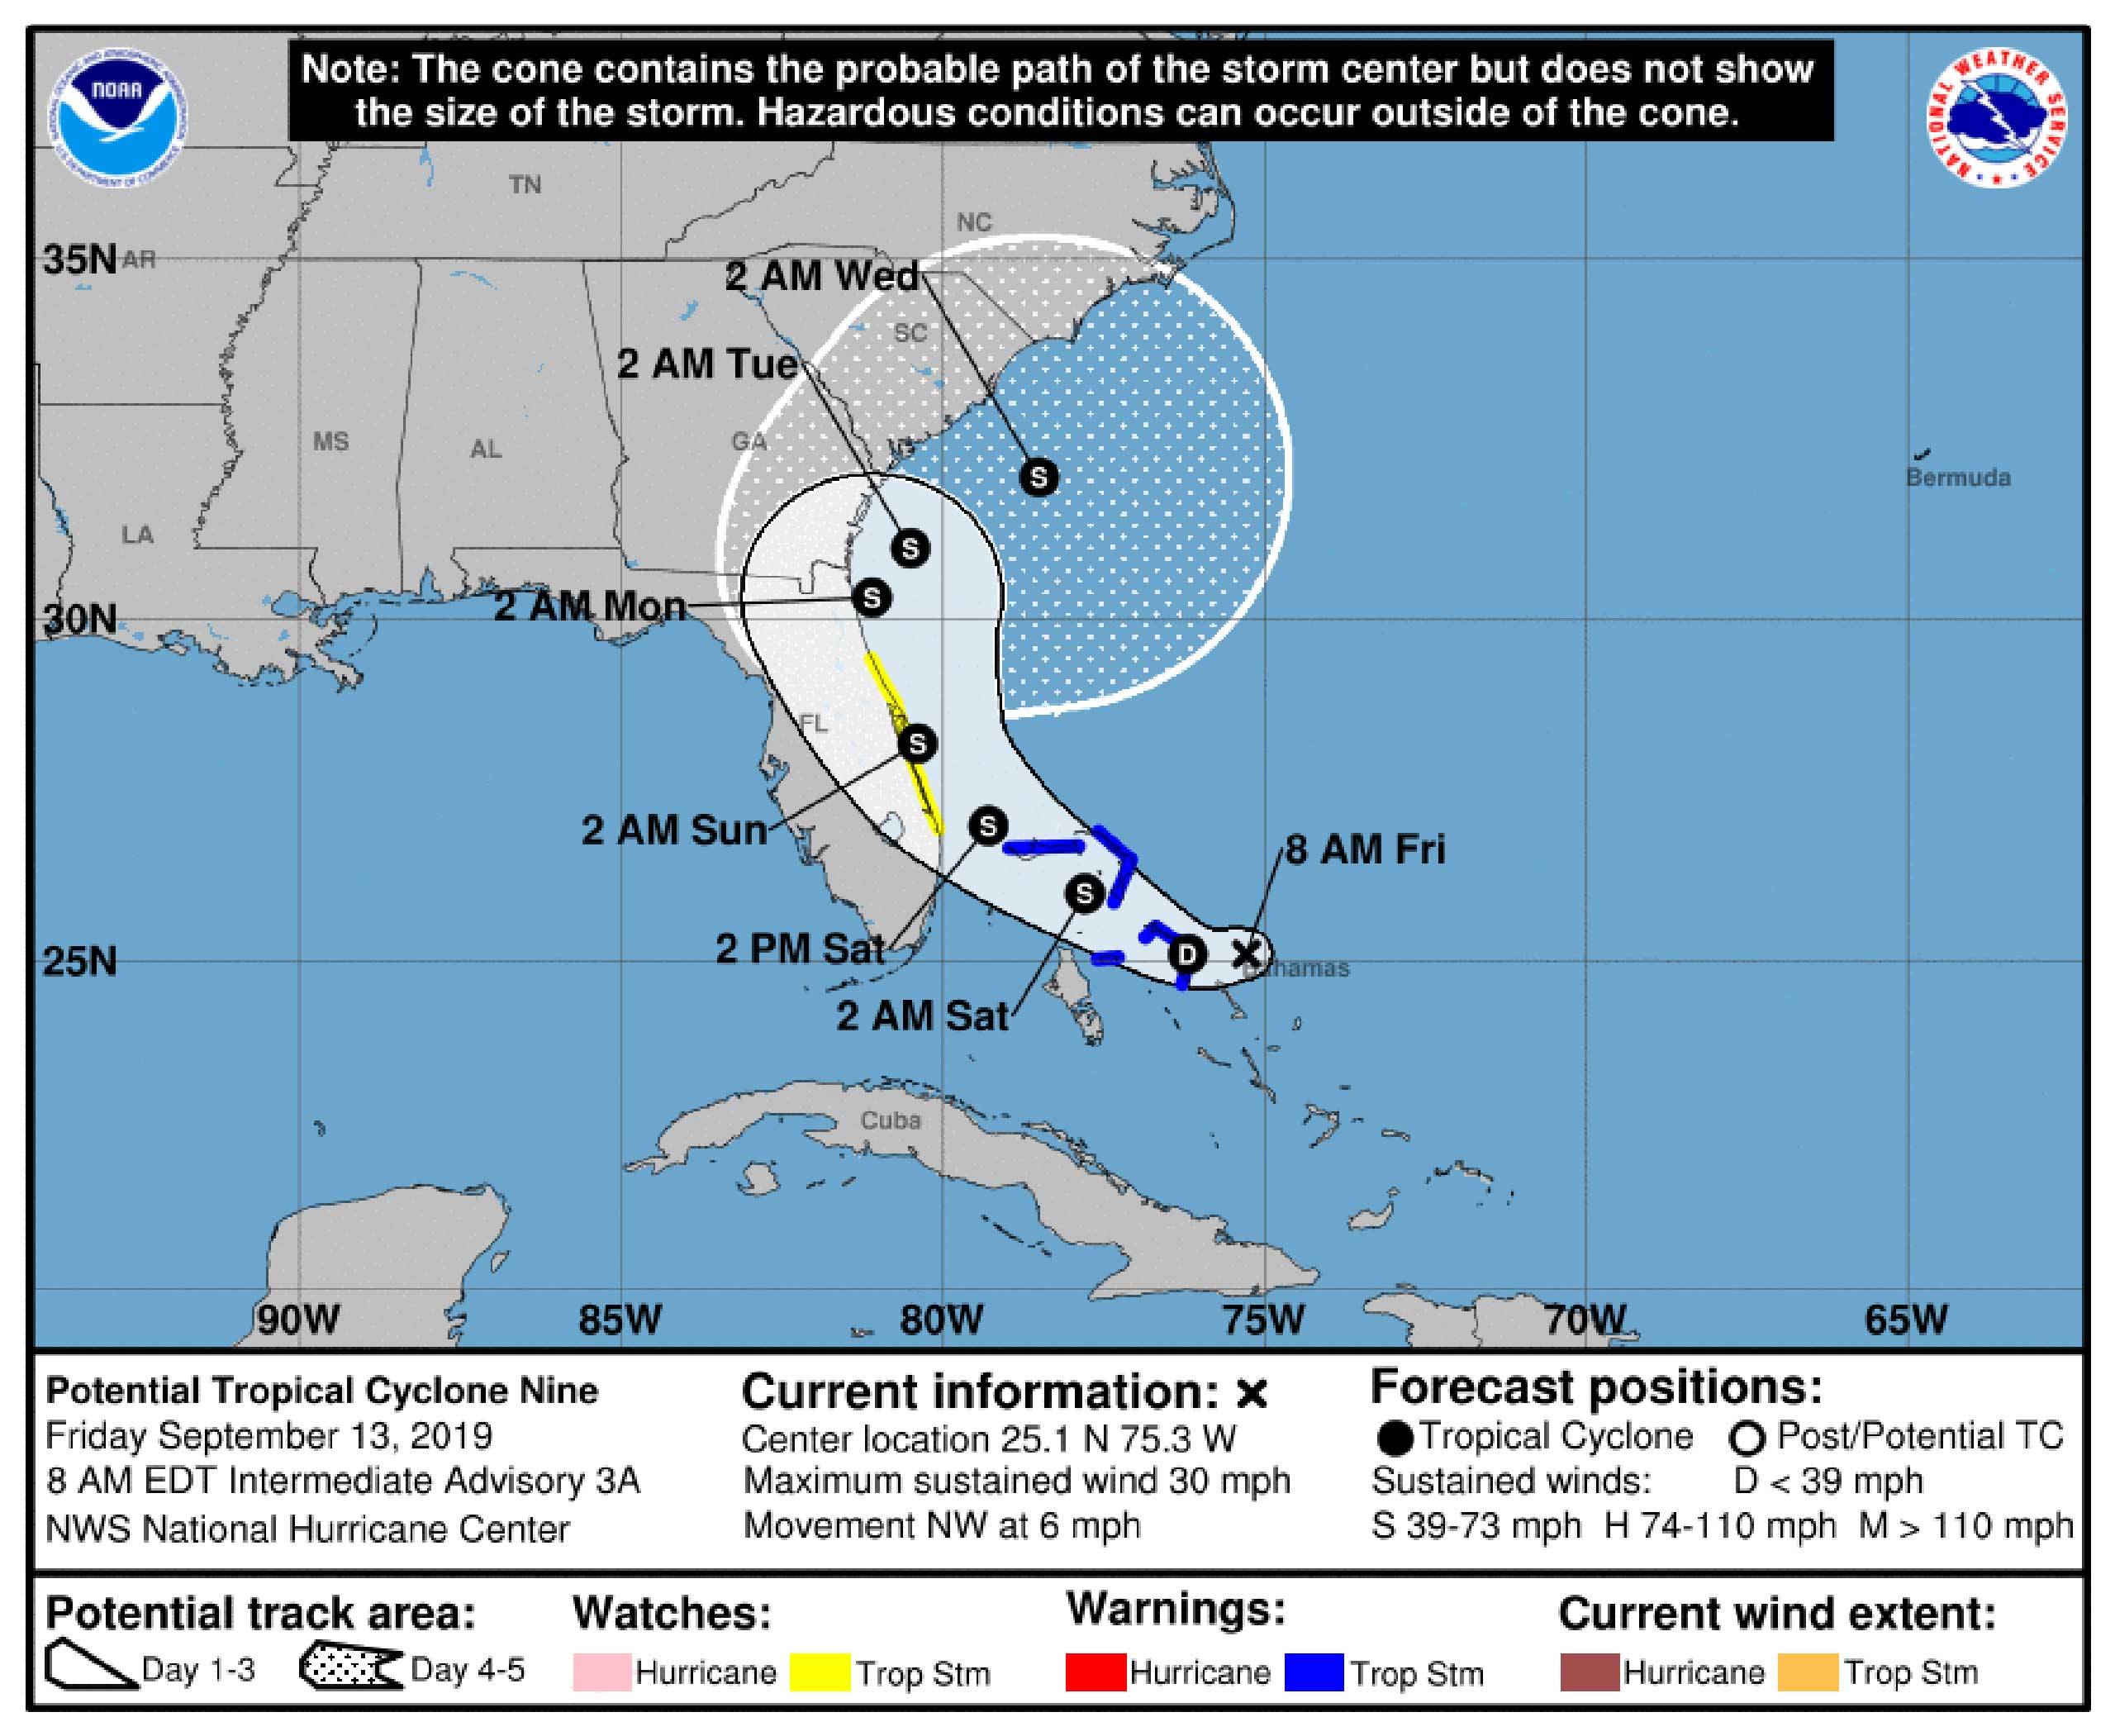 Potential Tropical Cyclone Nine to possibly impact the theme parks this weekend